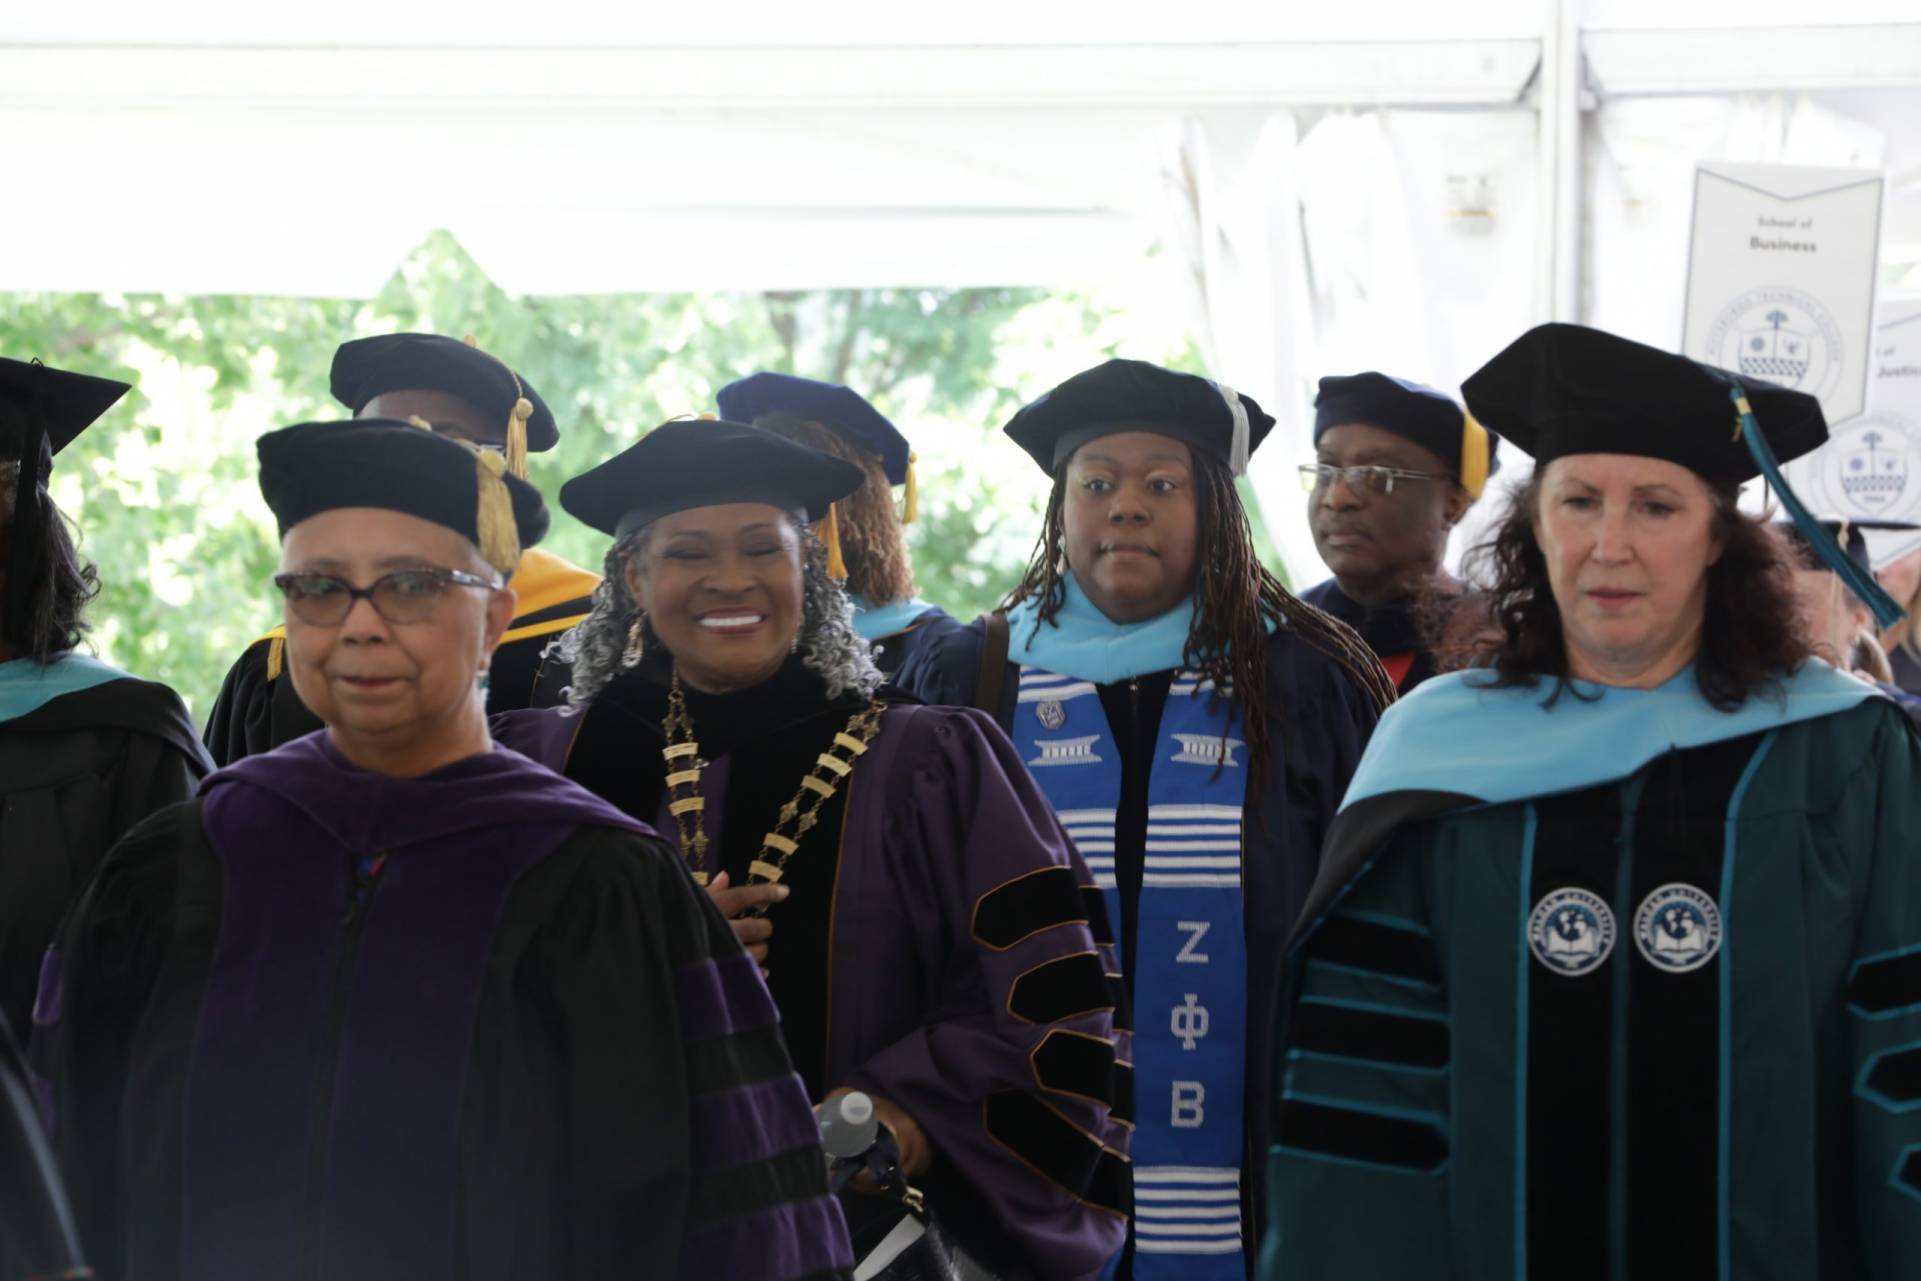 Members of the procession walking for the Installation of Dr. Harvey-Smith.